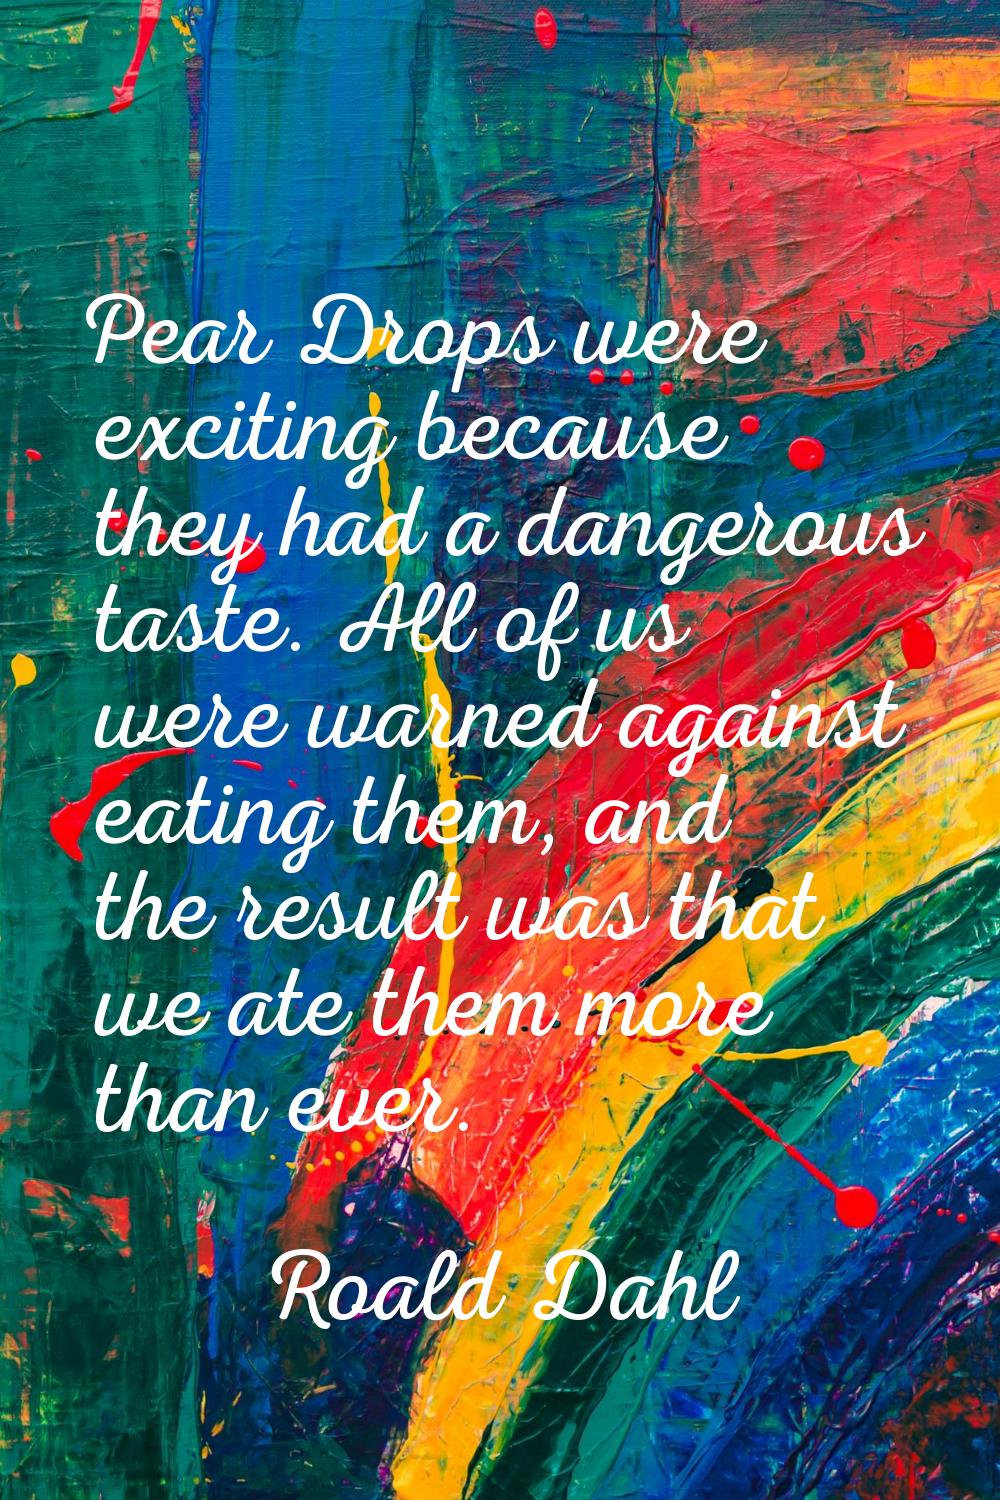 Pear Drops were exciting because they had a dangerous taste. All of us were warned against eating t